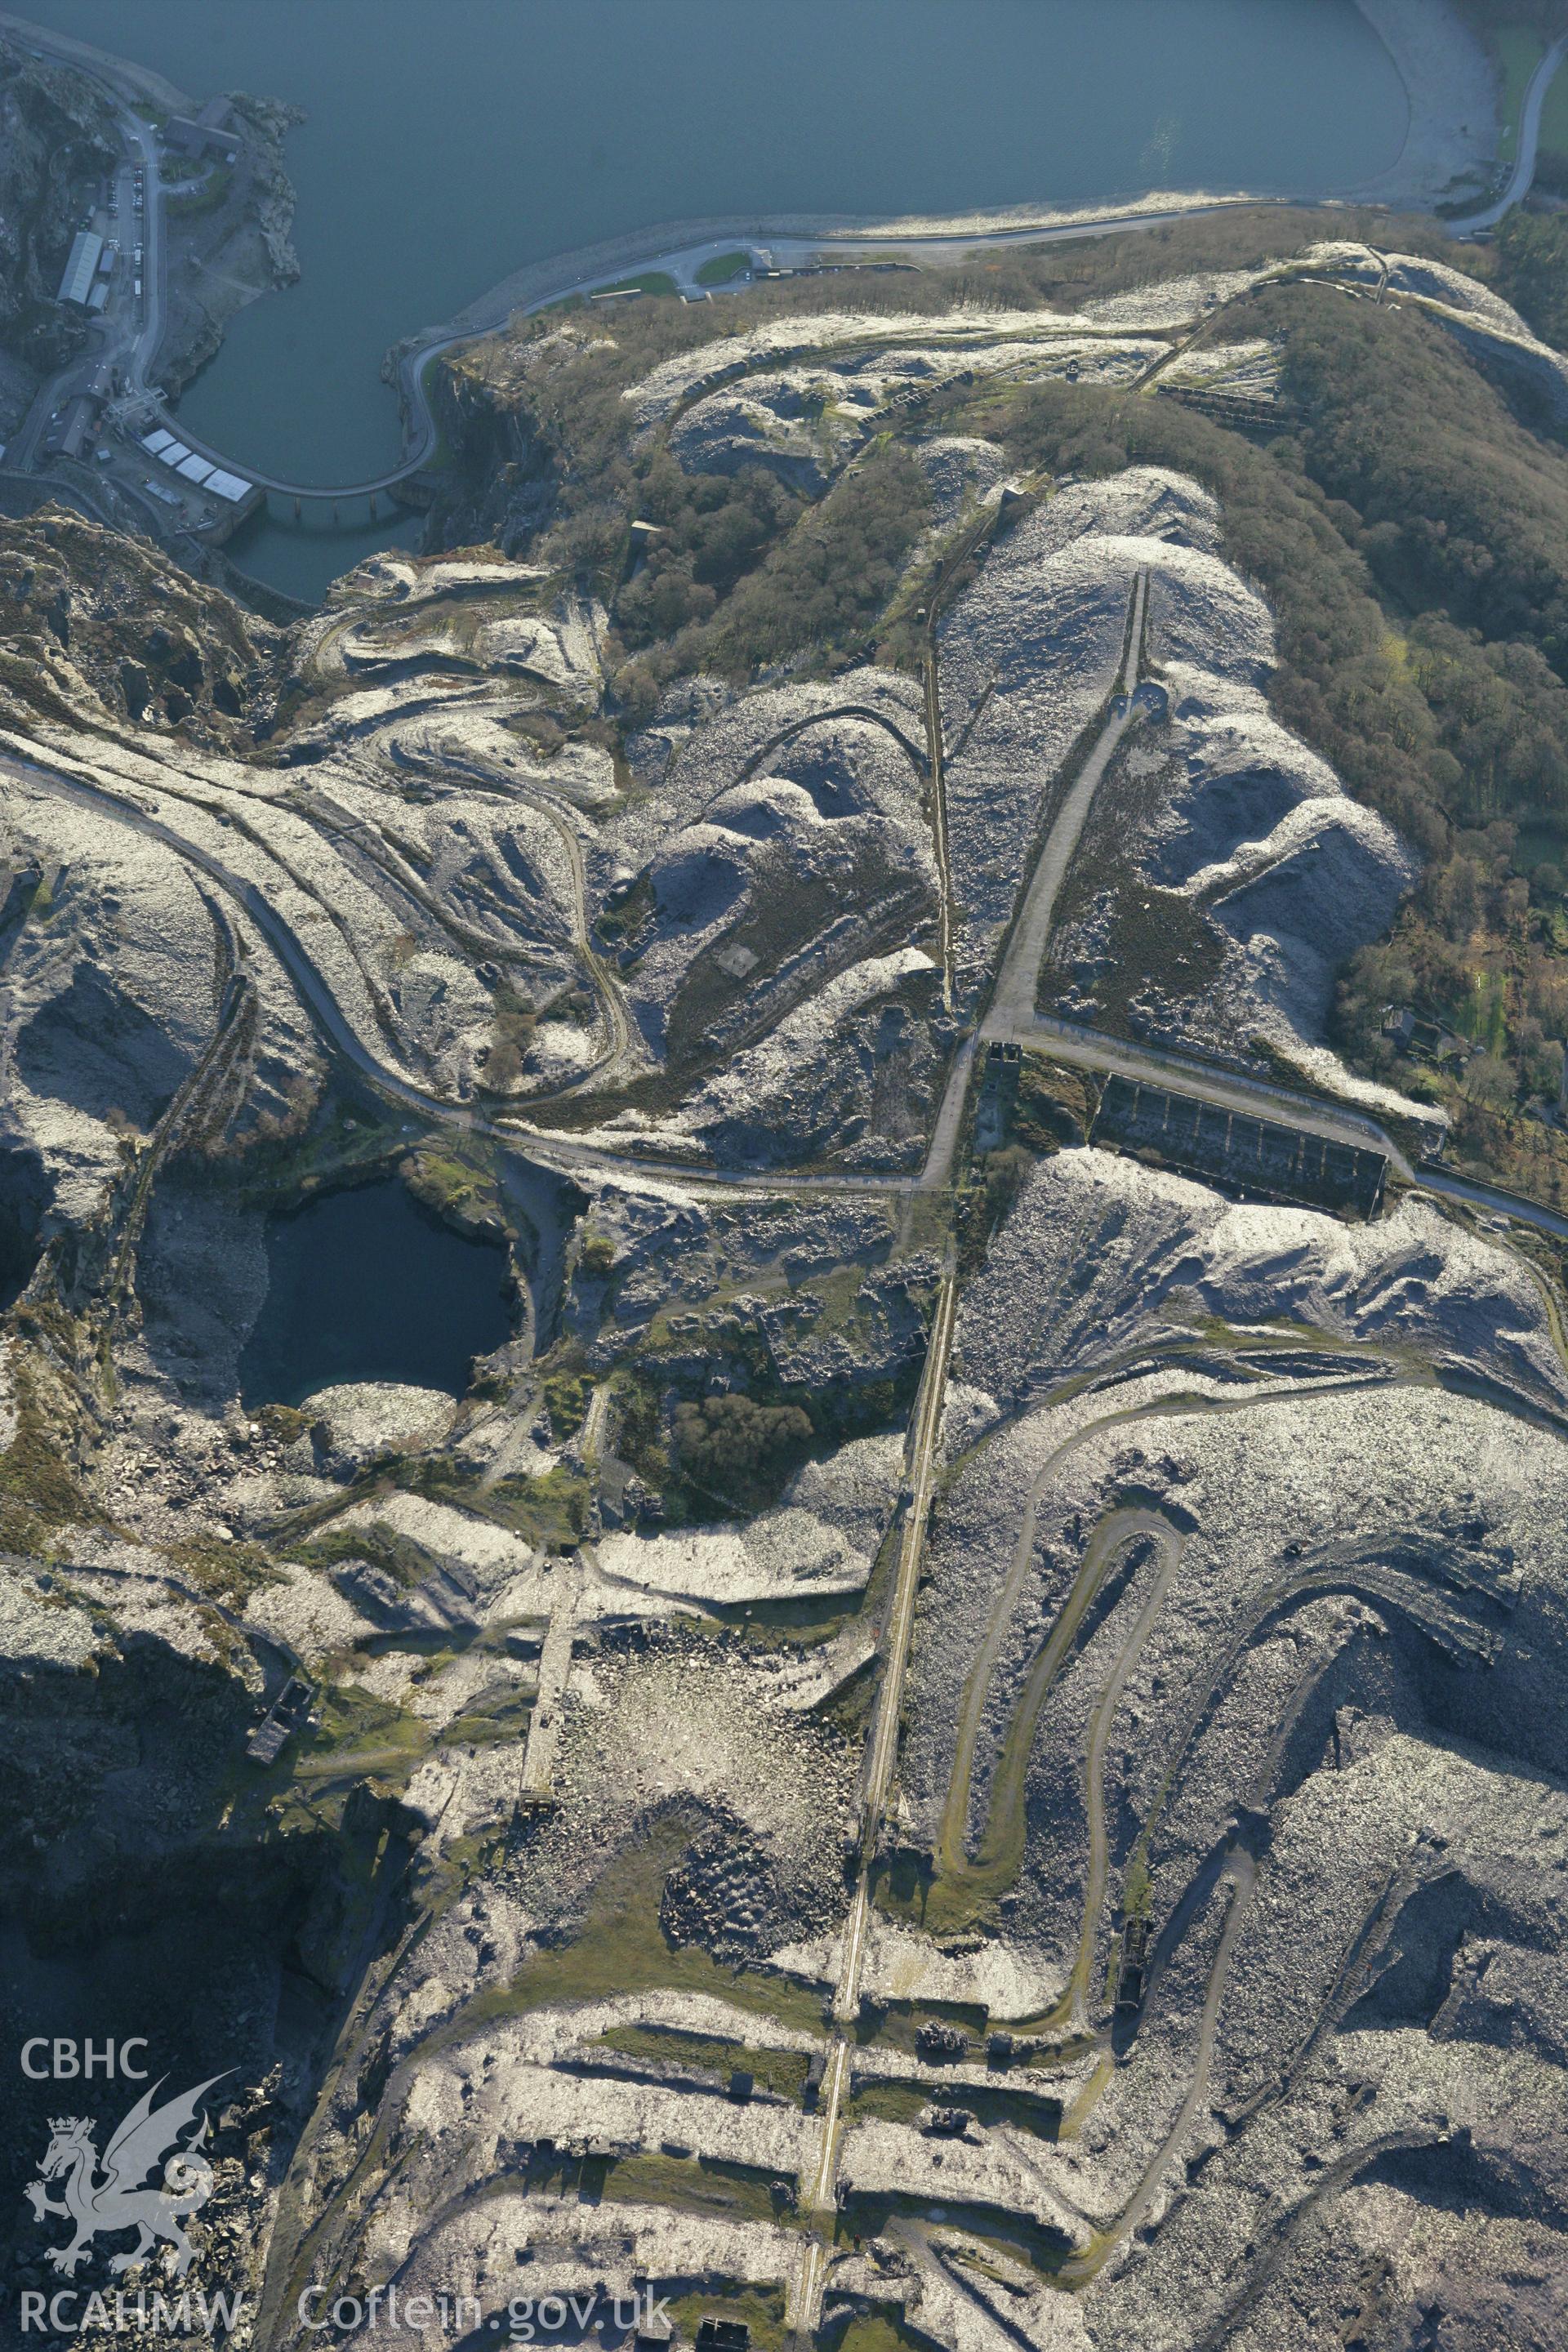 RCAHMW colour oblique photograph of Dinorwic Slate Quarry. Taken by Toby Driver on 20/12/2007.